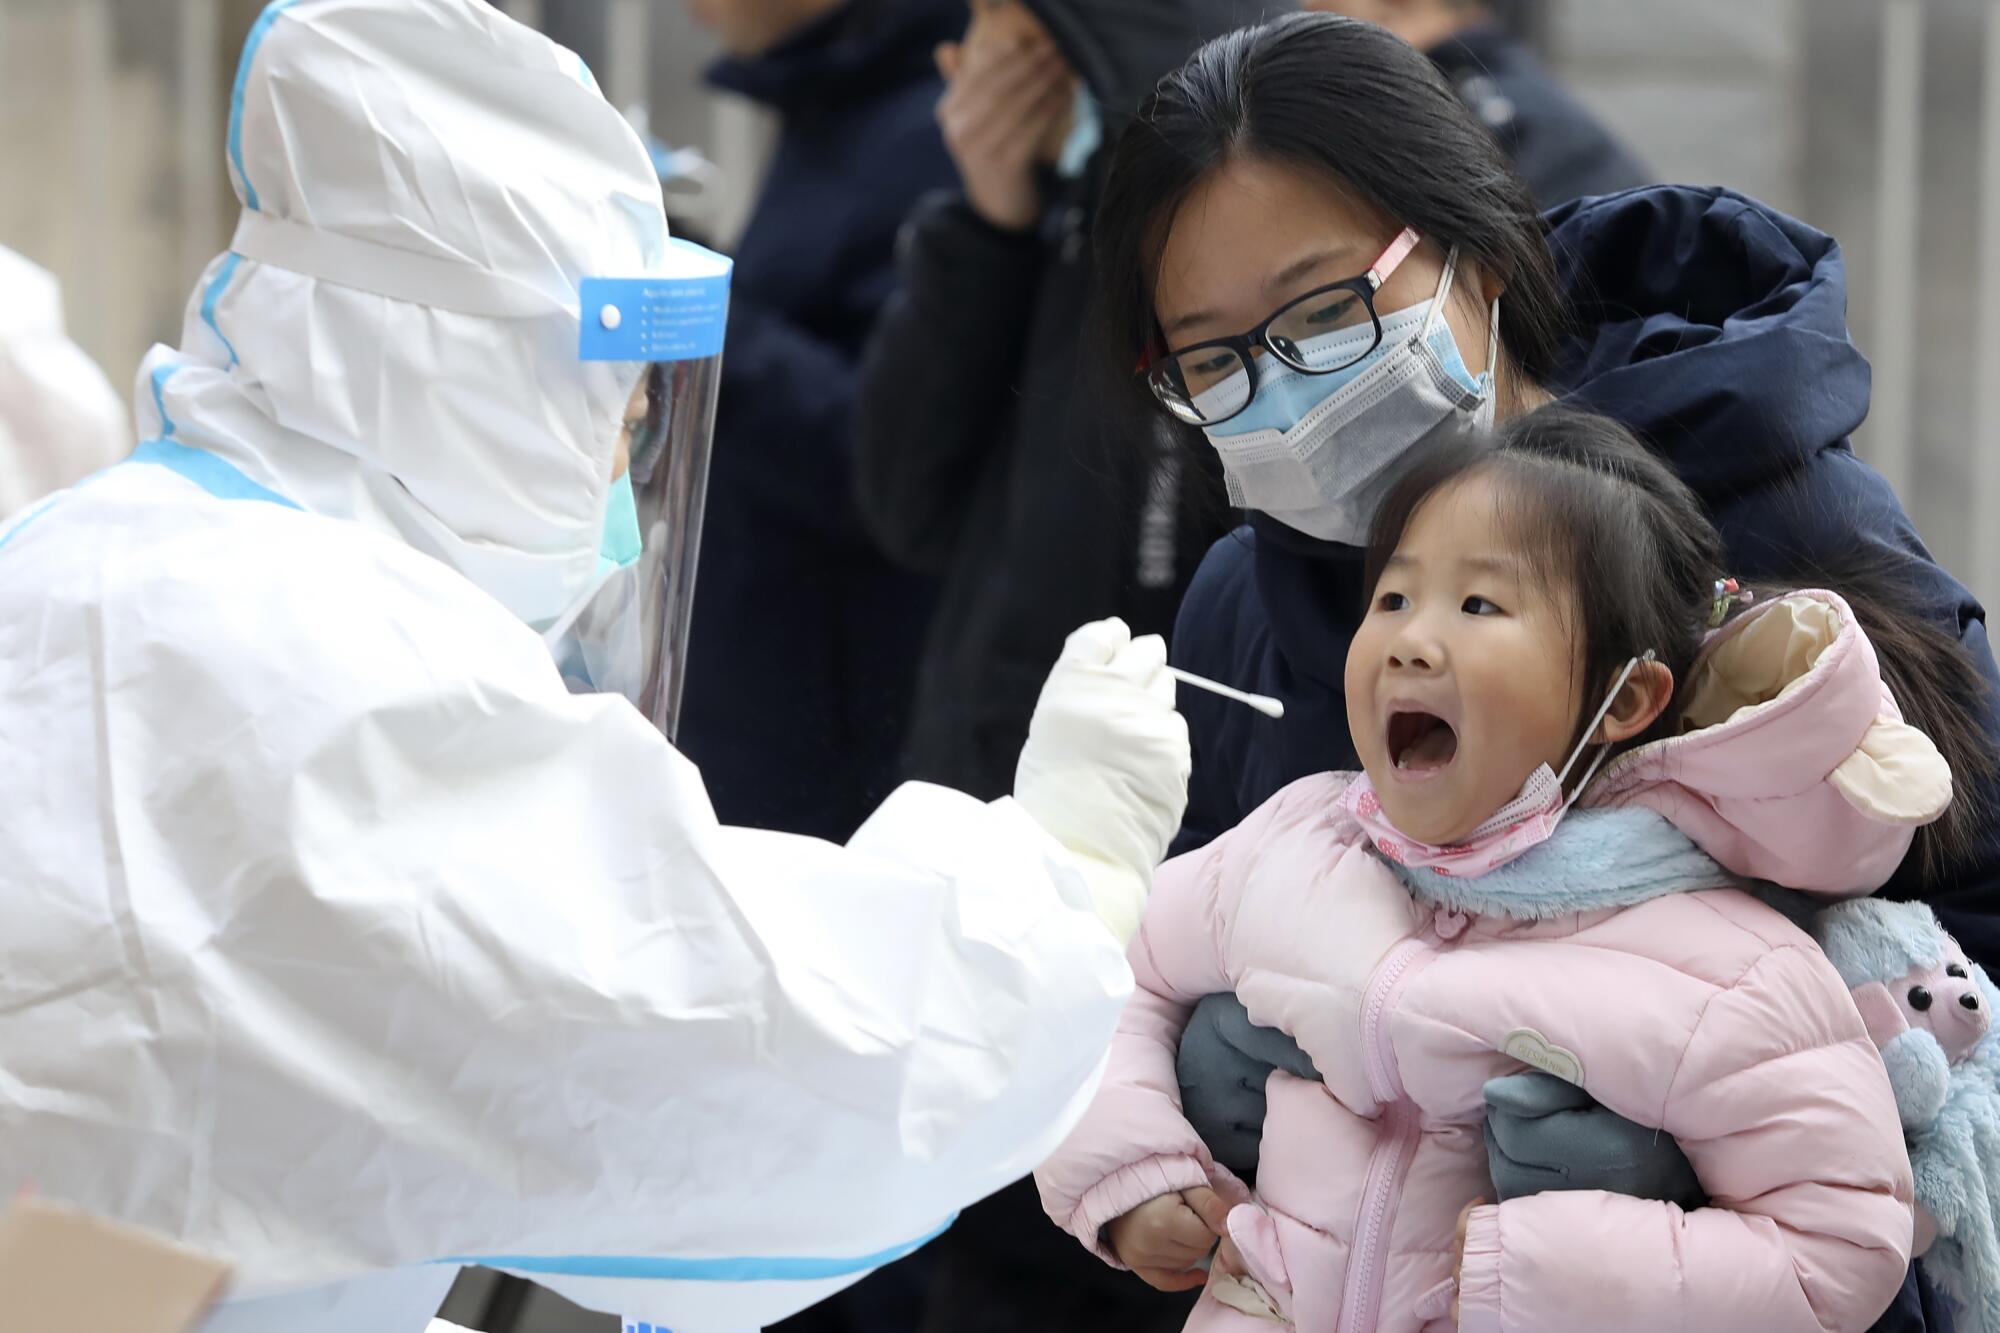 A worker in a protective suit takes a swab from a child for a coronavirus test in Shijiazhuang, in northern China.